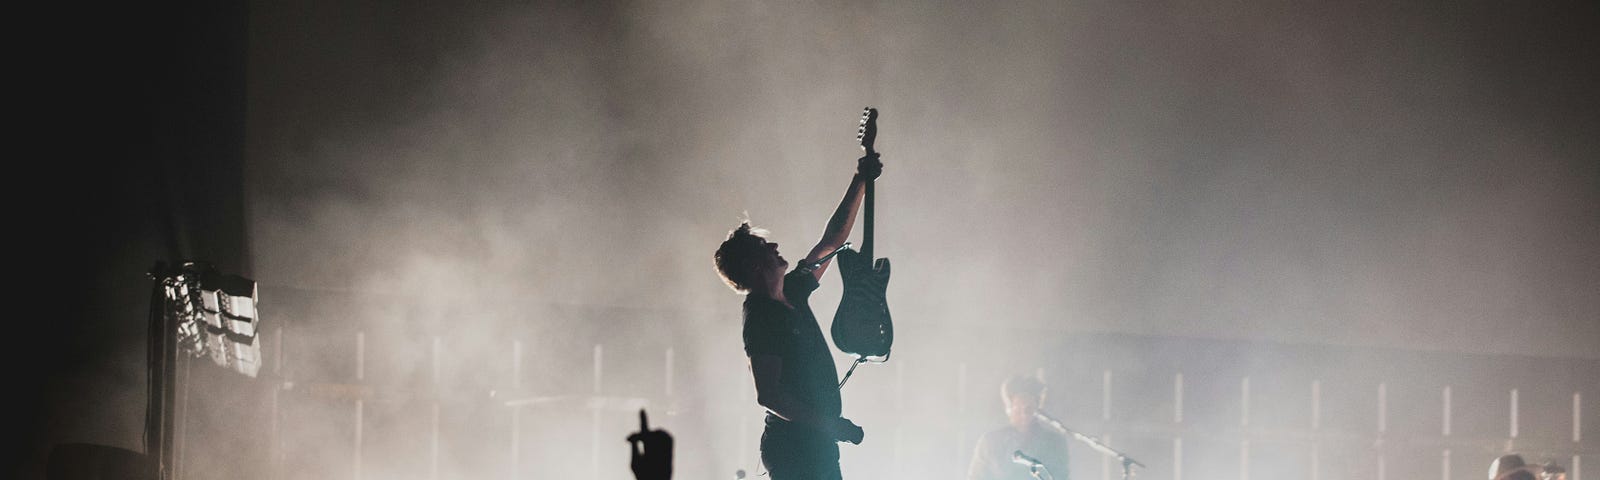 In a picture at a rock concert, a band member is holding up his guitar to the crowd